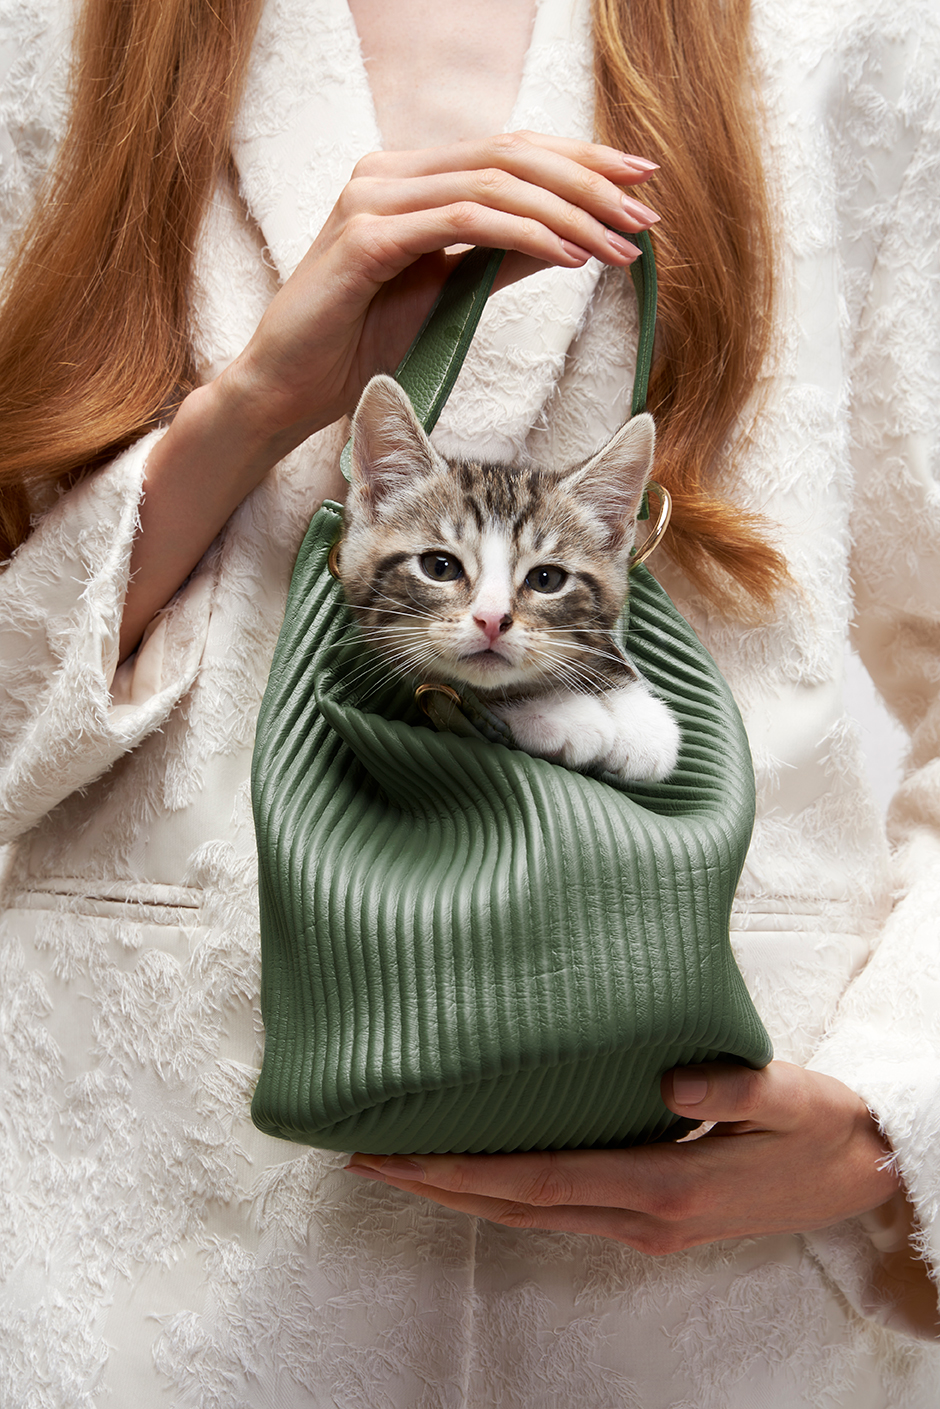 A model holding a bag with a kitten in it looking towards us.